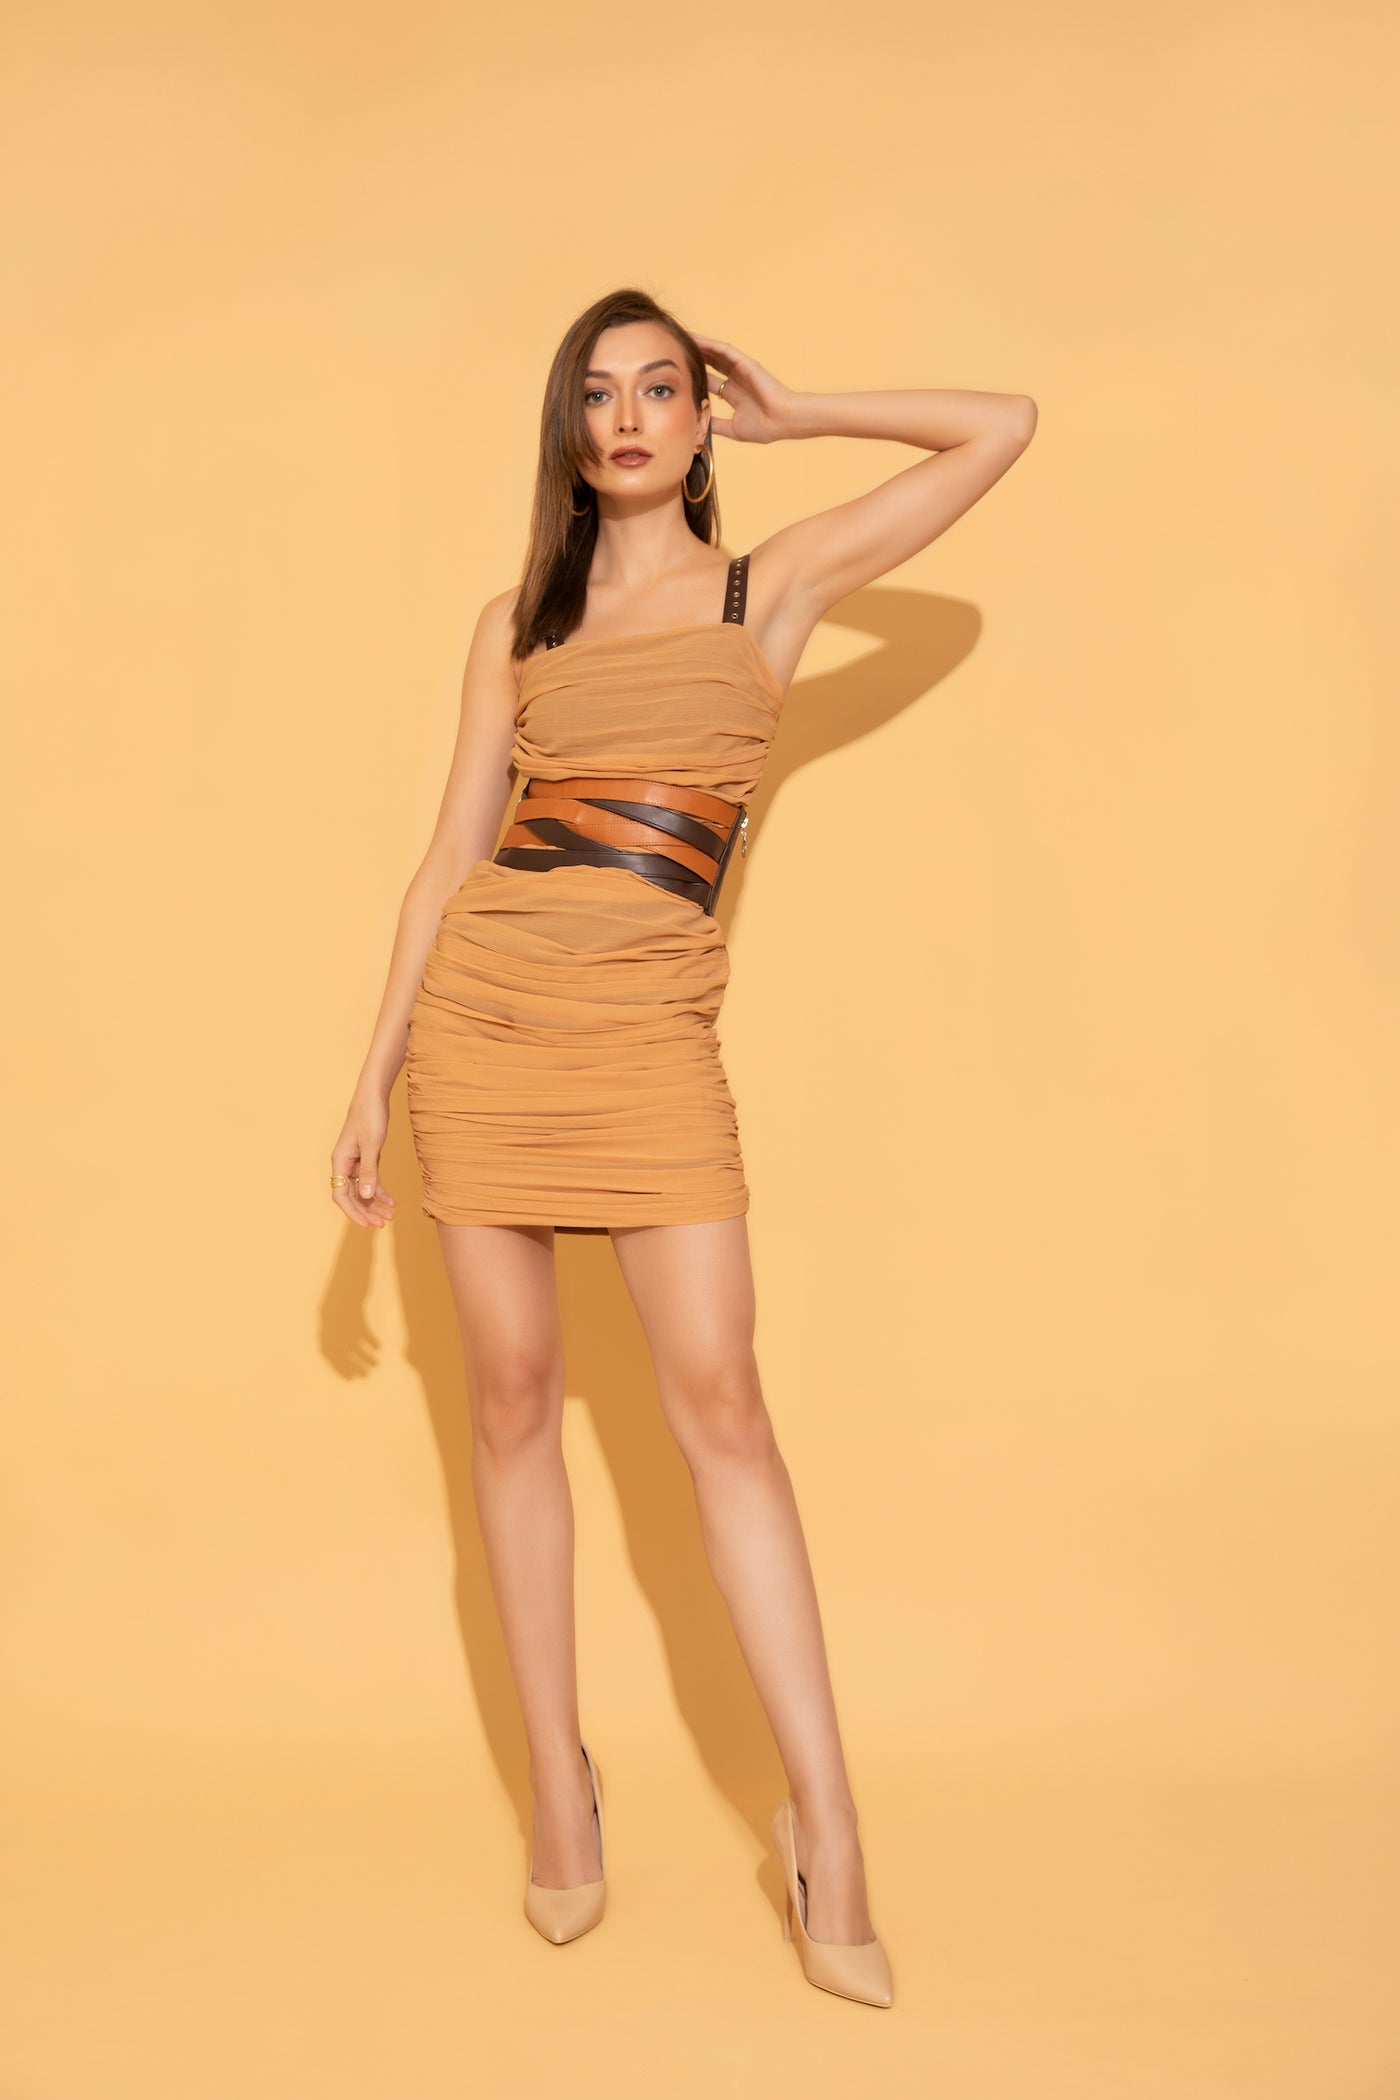 Ruched dress in peach colour featuring rivet detail leather strap and styled with criss-cross leather belt from Torqadorn